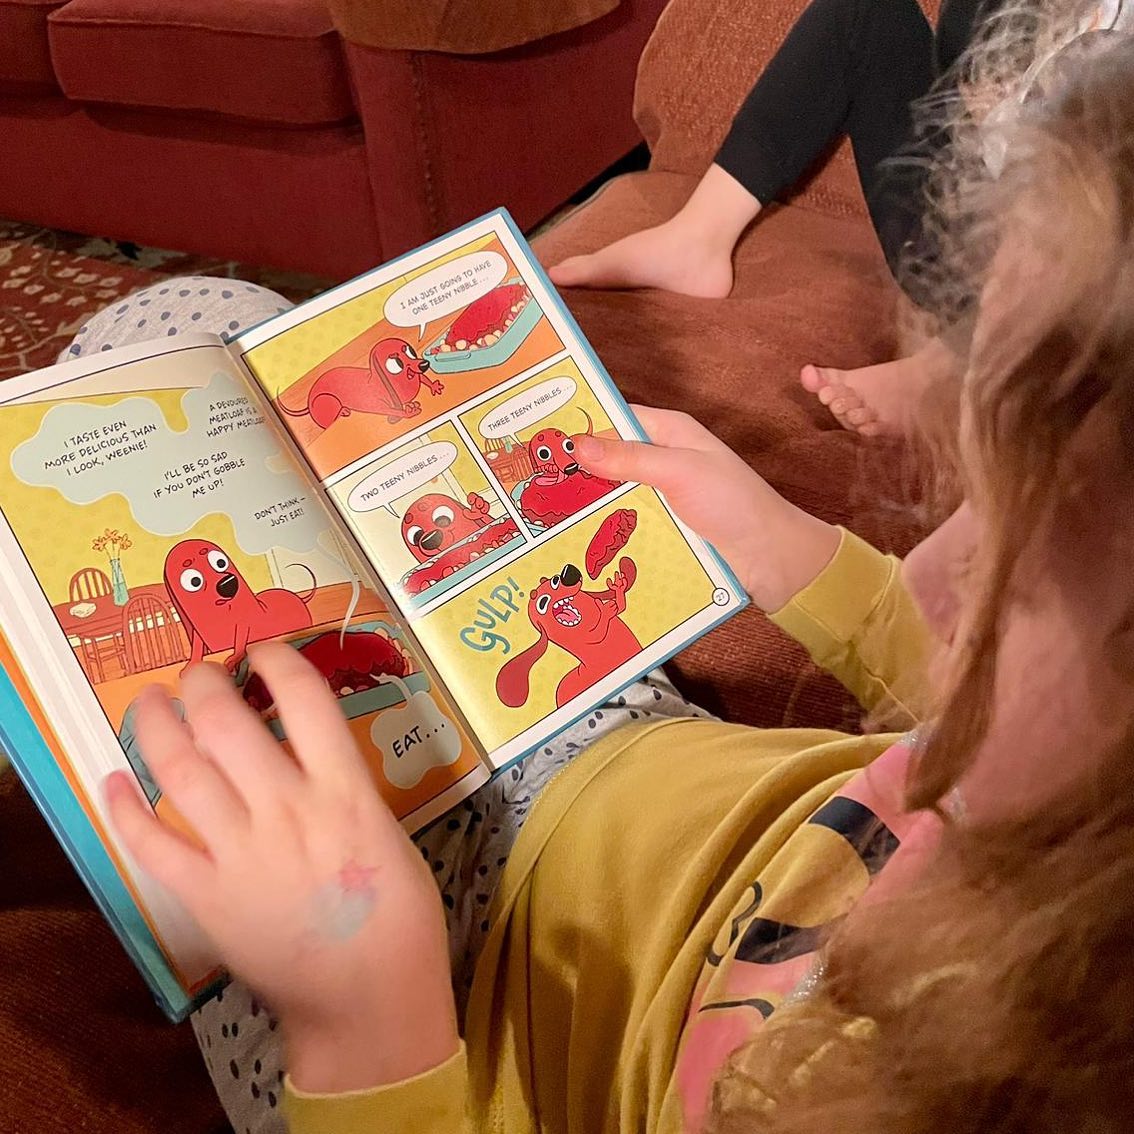 It’s the last weekend in February, with only a few days left to add to your Read-A-Thon reading logs! Isabelle in Grade 2 recommends the graphic novel series “Weenie, featuring Frank & Beans” (here she’s reading Book 1: Mad About Meatloaf). 

Let us know if you’re looking for book inspo and we’re happy to share recommendations! Every minute counts for a chance to win individual and class prizes. We’re in the home stretch - you can do it! 📚 #rodenreadathon